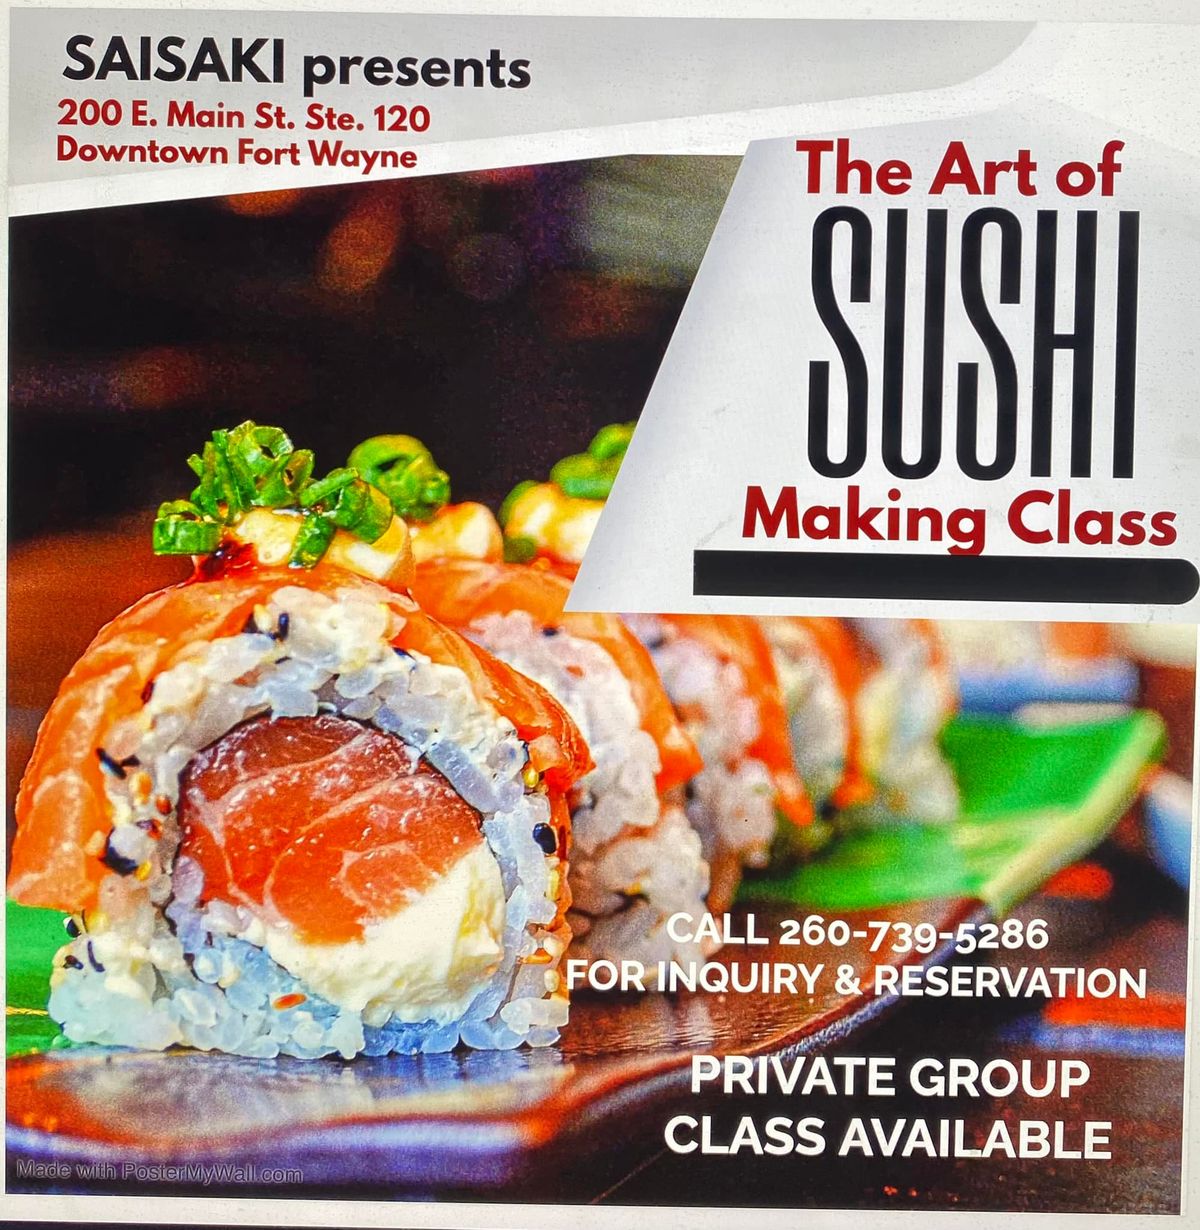 Sushi Class for All Occasions!